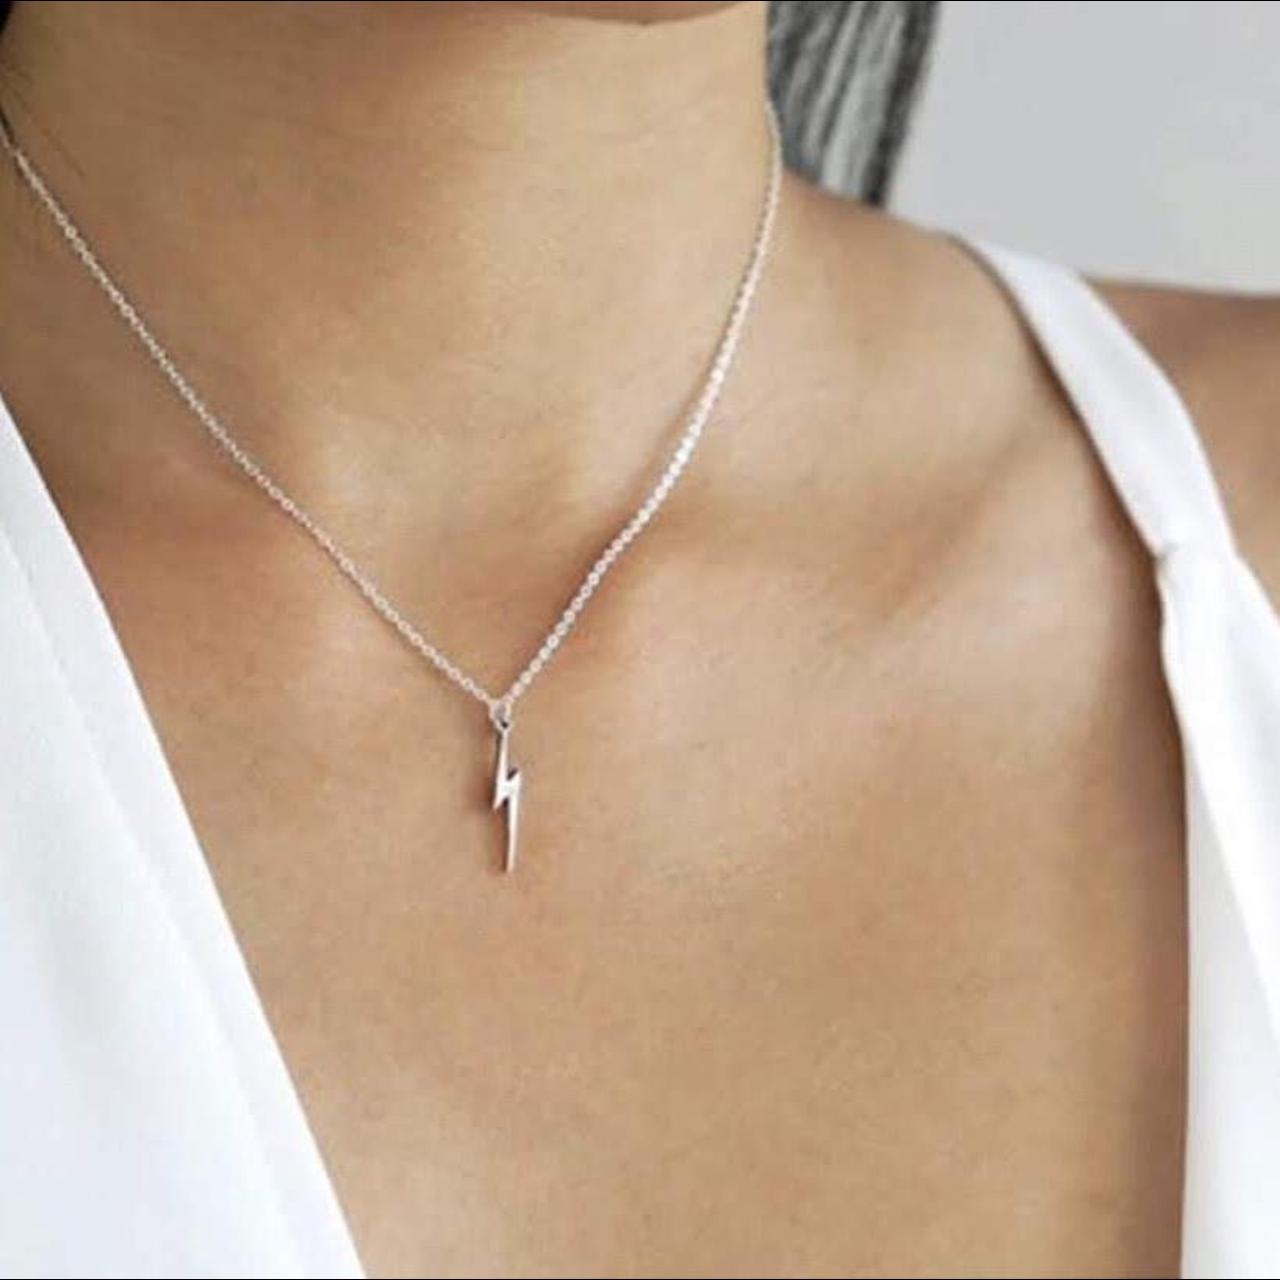 Buy Artmiss Lightning Bolt Pendant Necklace Women Simple Charm Bar Choker  Chain Jewelry for Girls (Gold) at Amazon.in